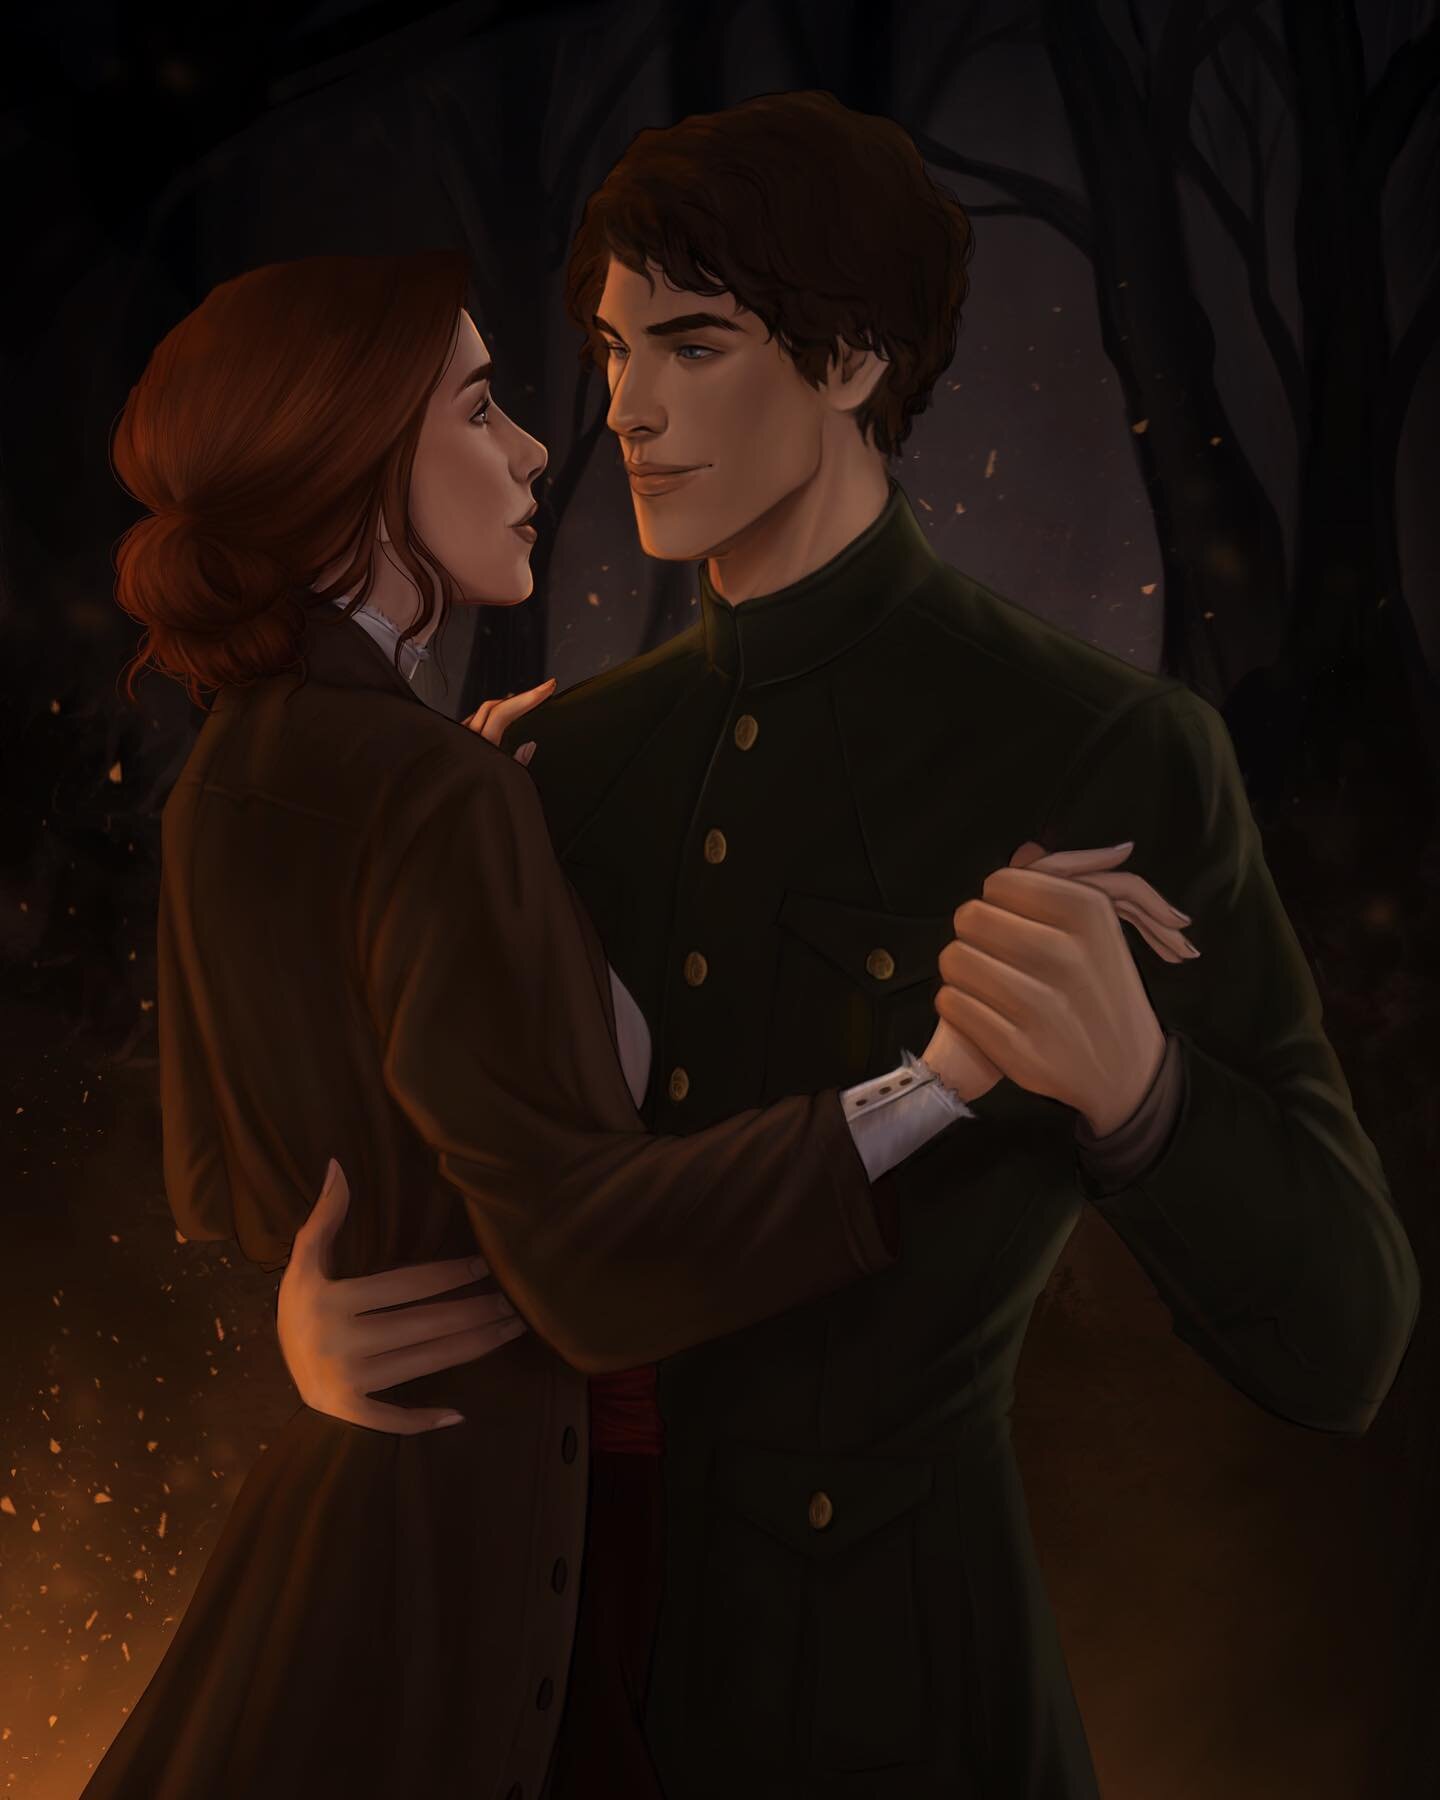 Kase and Hallie for @alli_earnest_writes from her series the Gate Chronicles (Cities of Smoke and Starlight and her upcoming Realms of Wrath and Ruin) 
I had a lot of fun with this piece (hello campfire vibes!)
&bull;
#realmsofwrathandruin #citiesofs